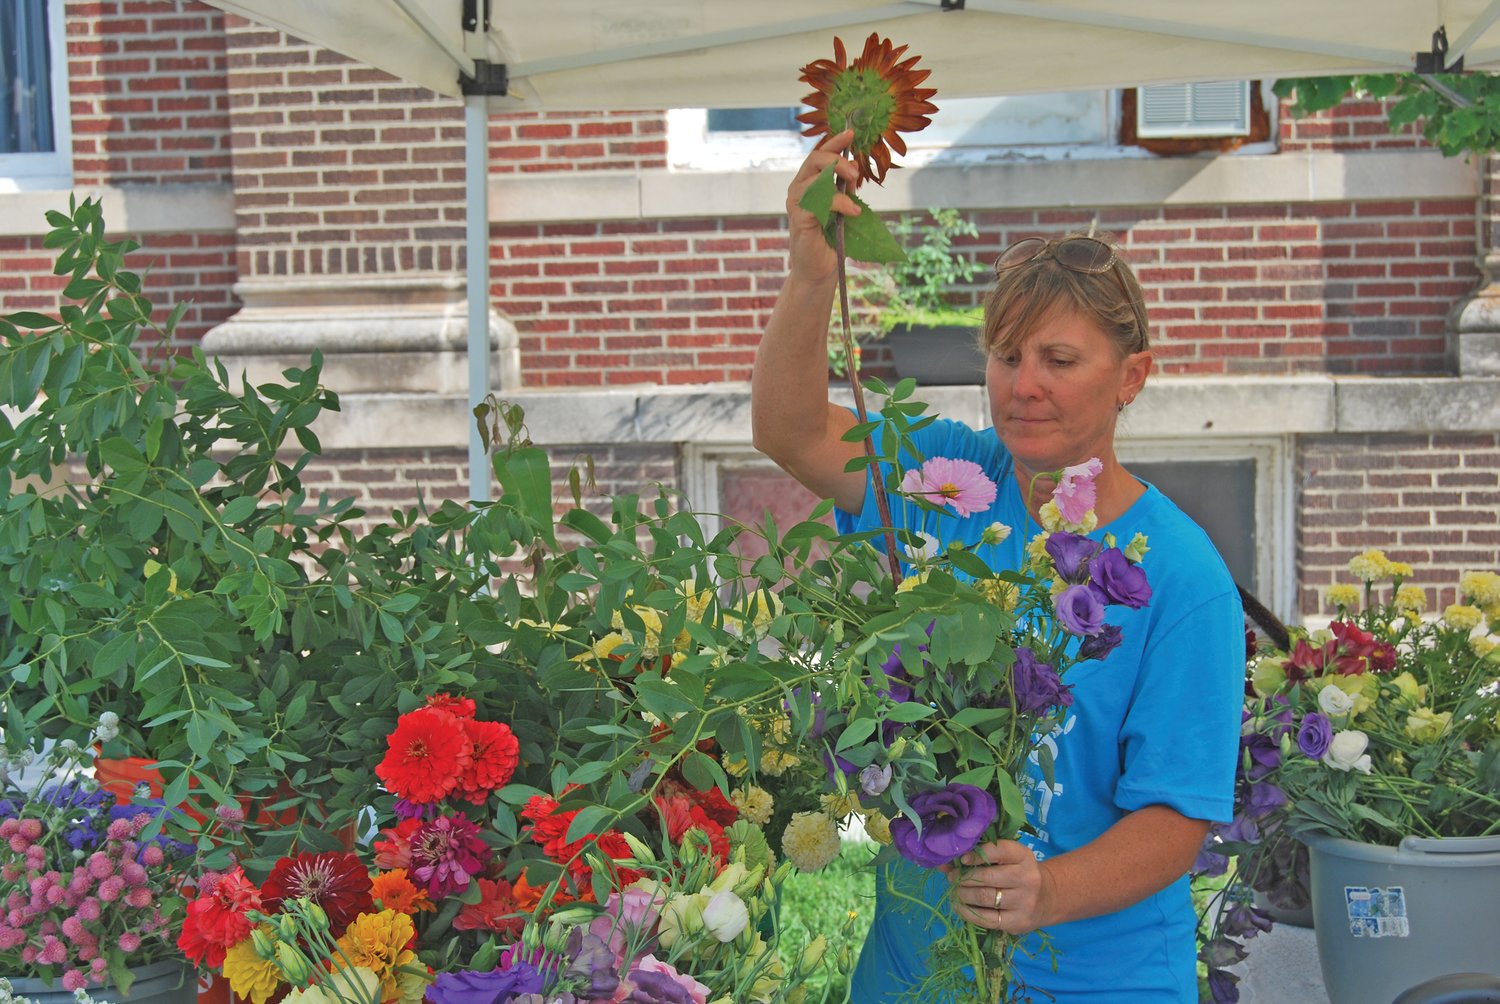 Jamie Smith of Fall Creek Farm arranges a flower bouquet at the Crawfordsville Farmers Market Saturday.